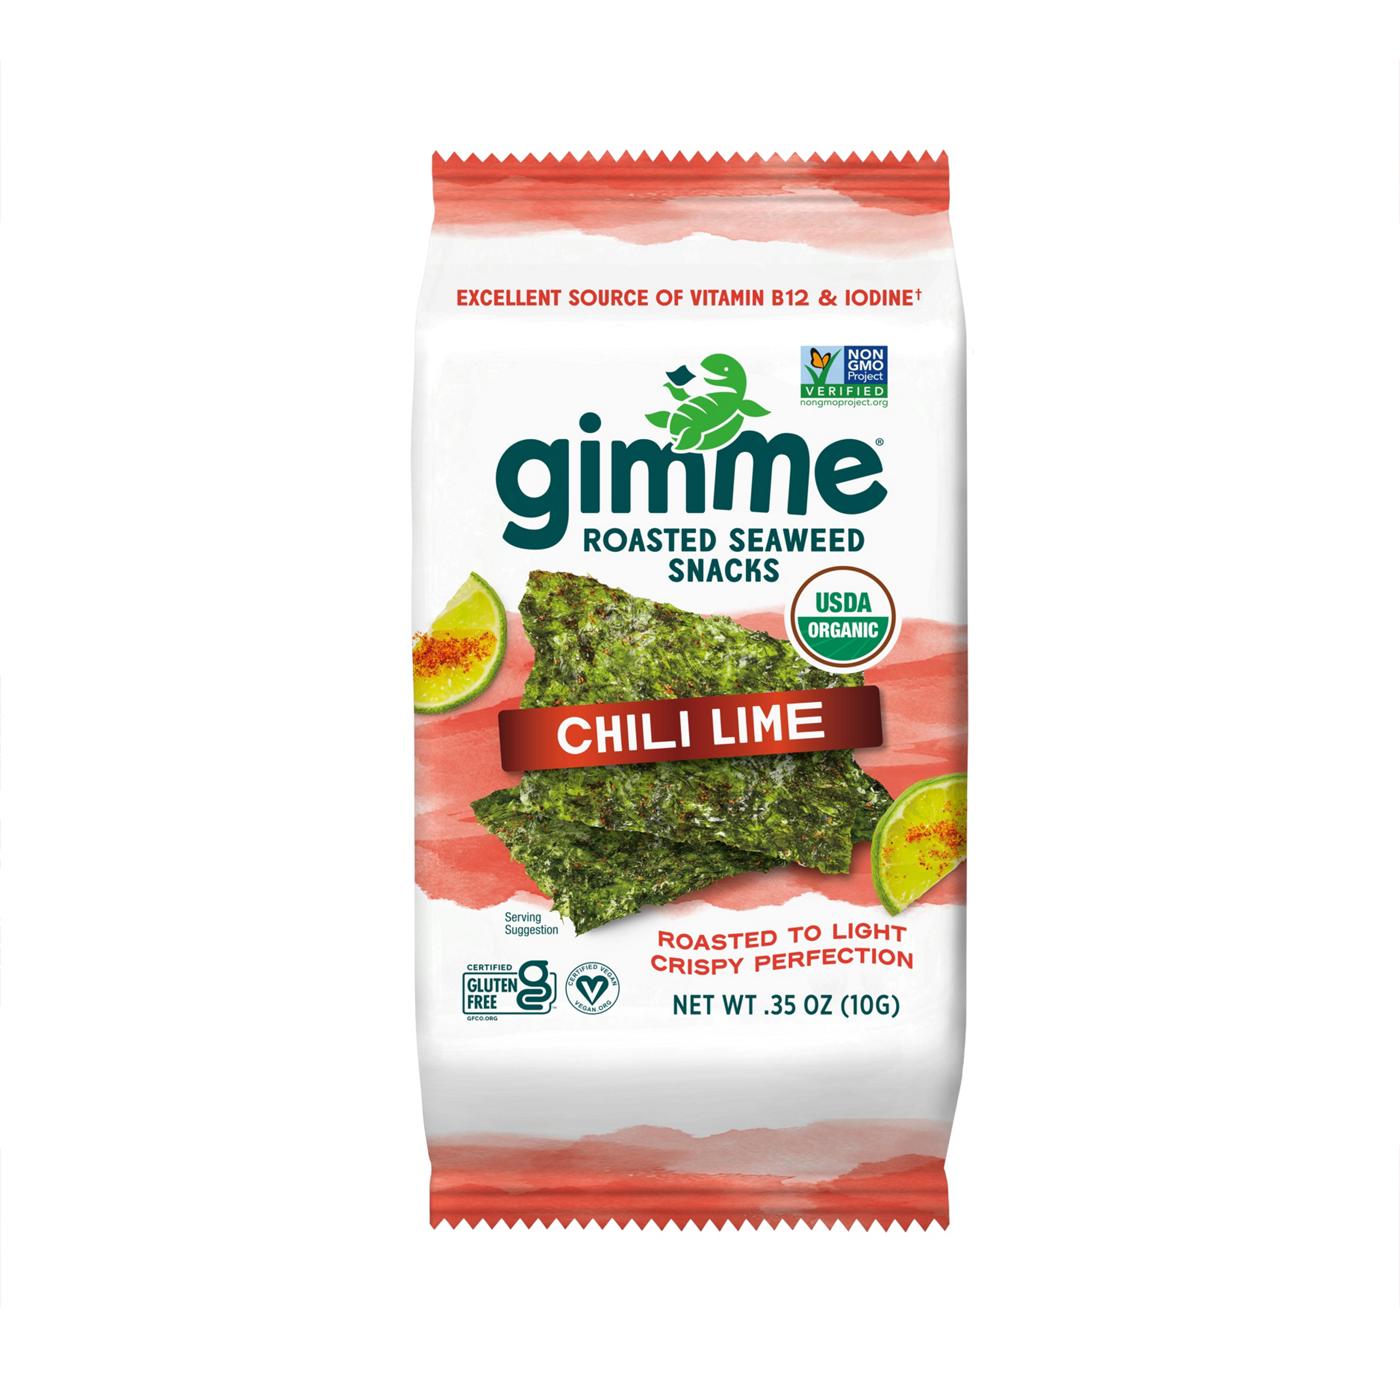 Gimme Roasted Seaweed Snack Chili Lime; image 1 of 8